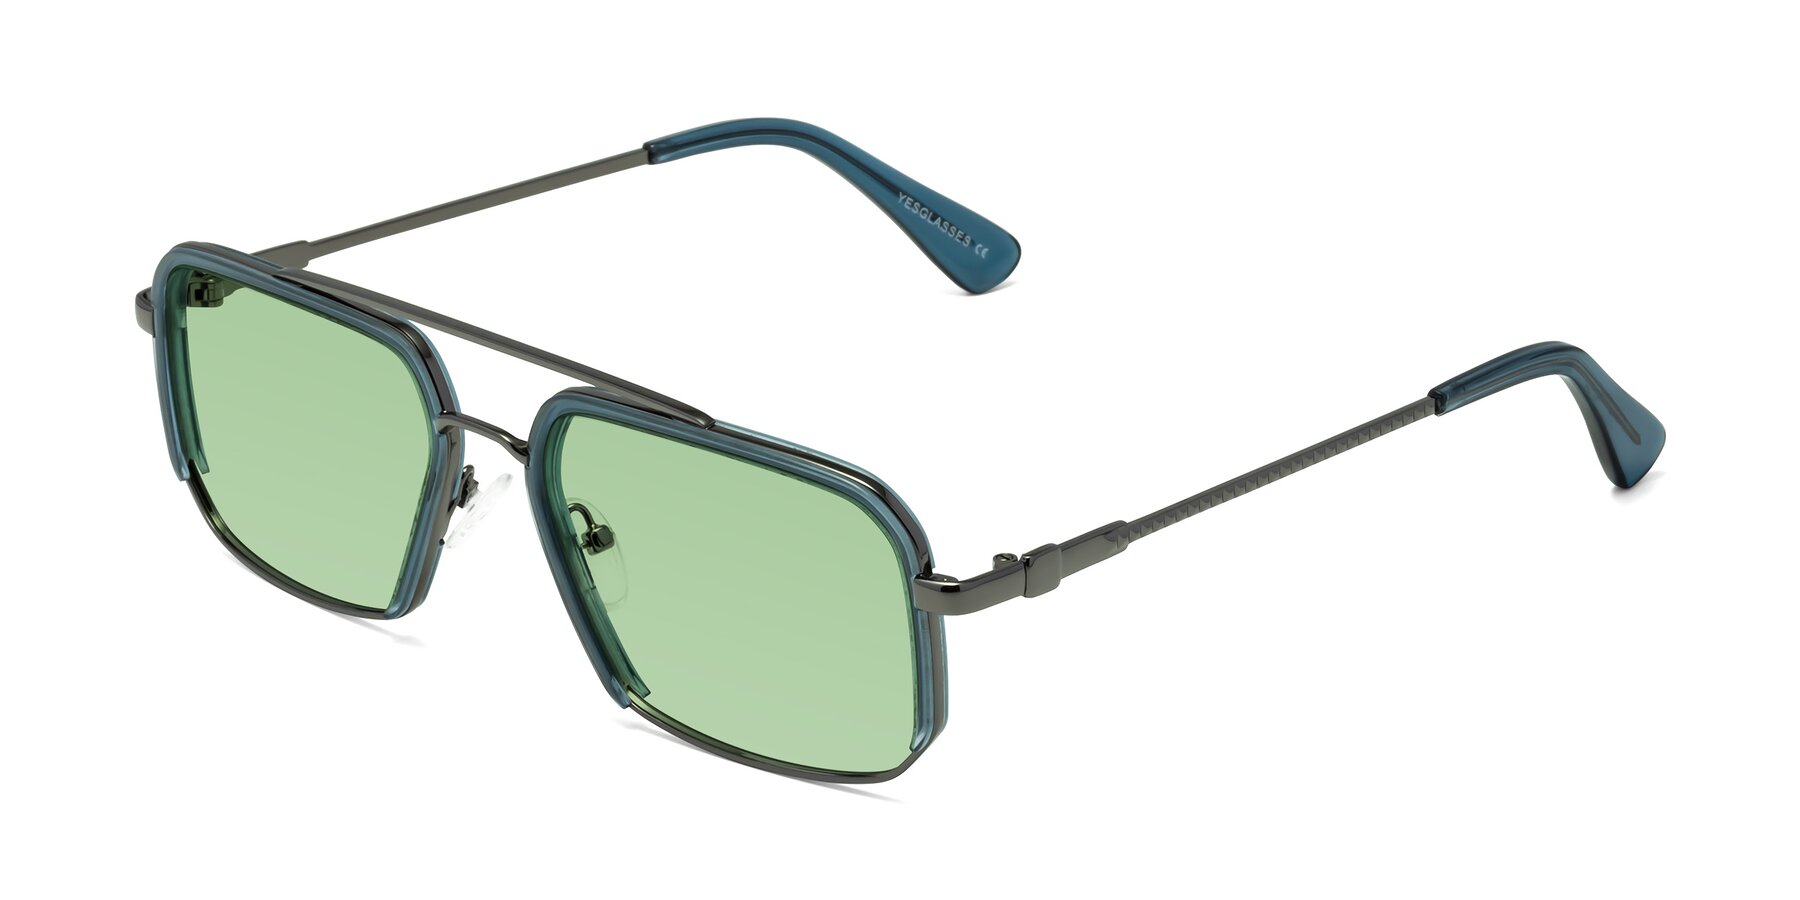 Angle of Dechter in Teal-Gunmetal with Medium Green Tinted Lenses